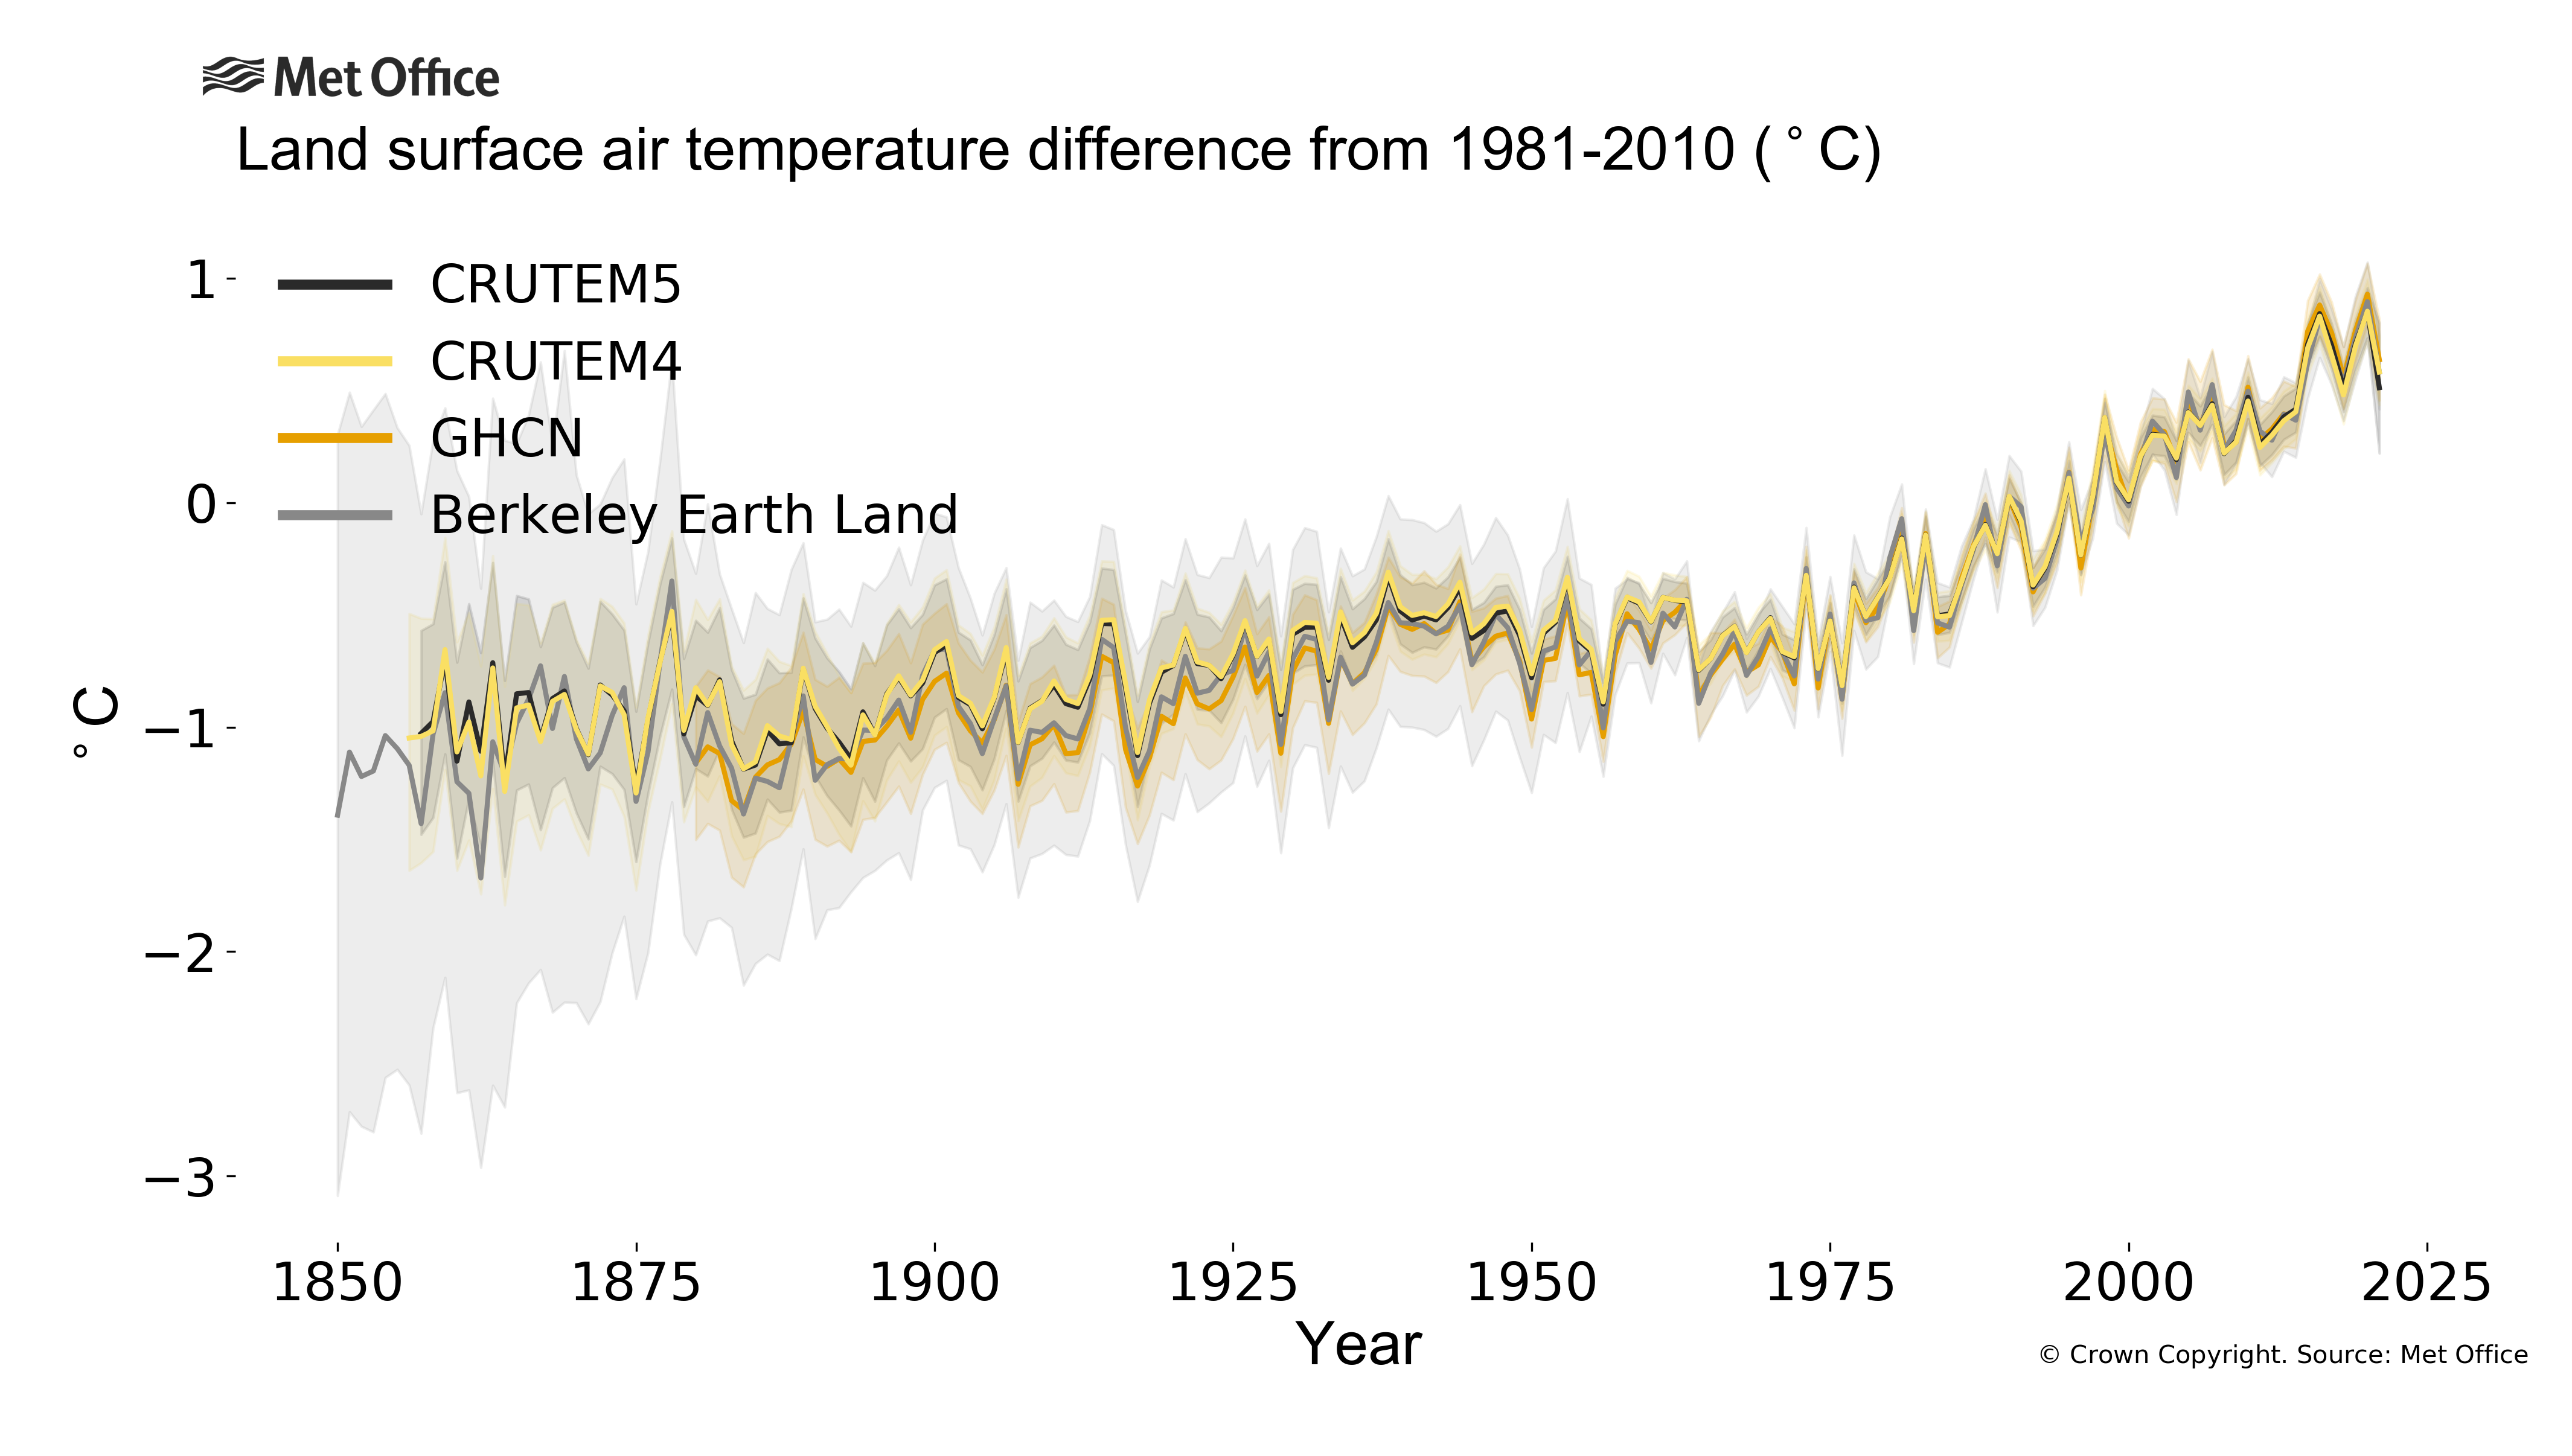 
Annual global mean land-surface temperature difference from 1981-2010 average.
